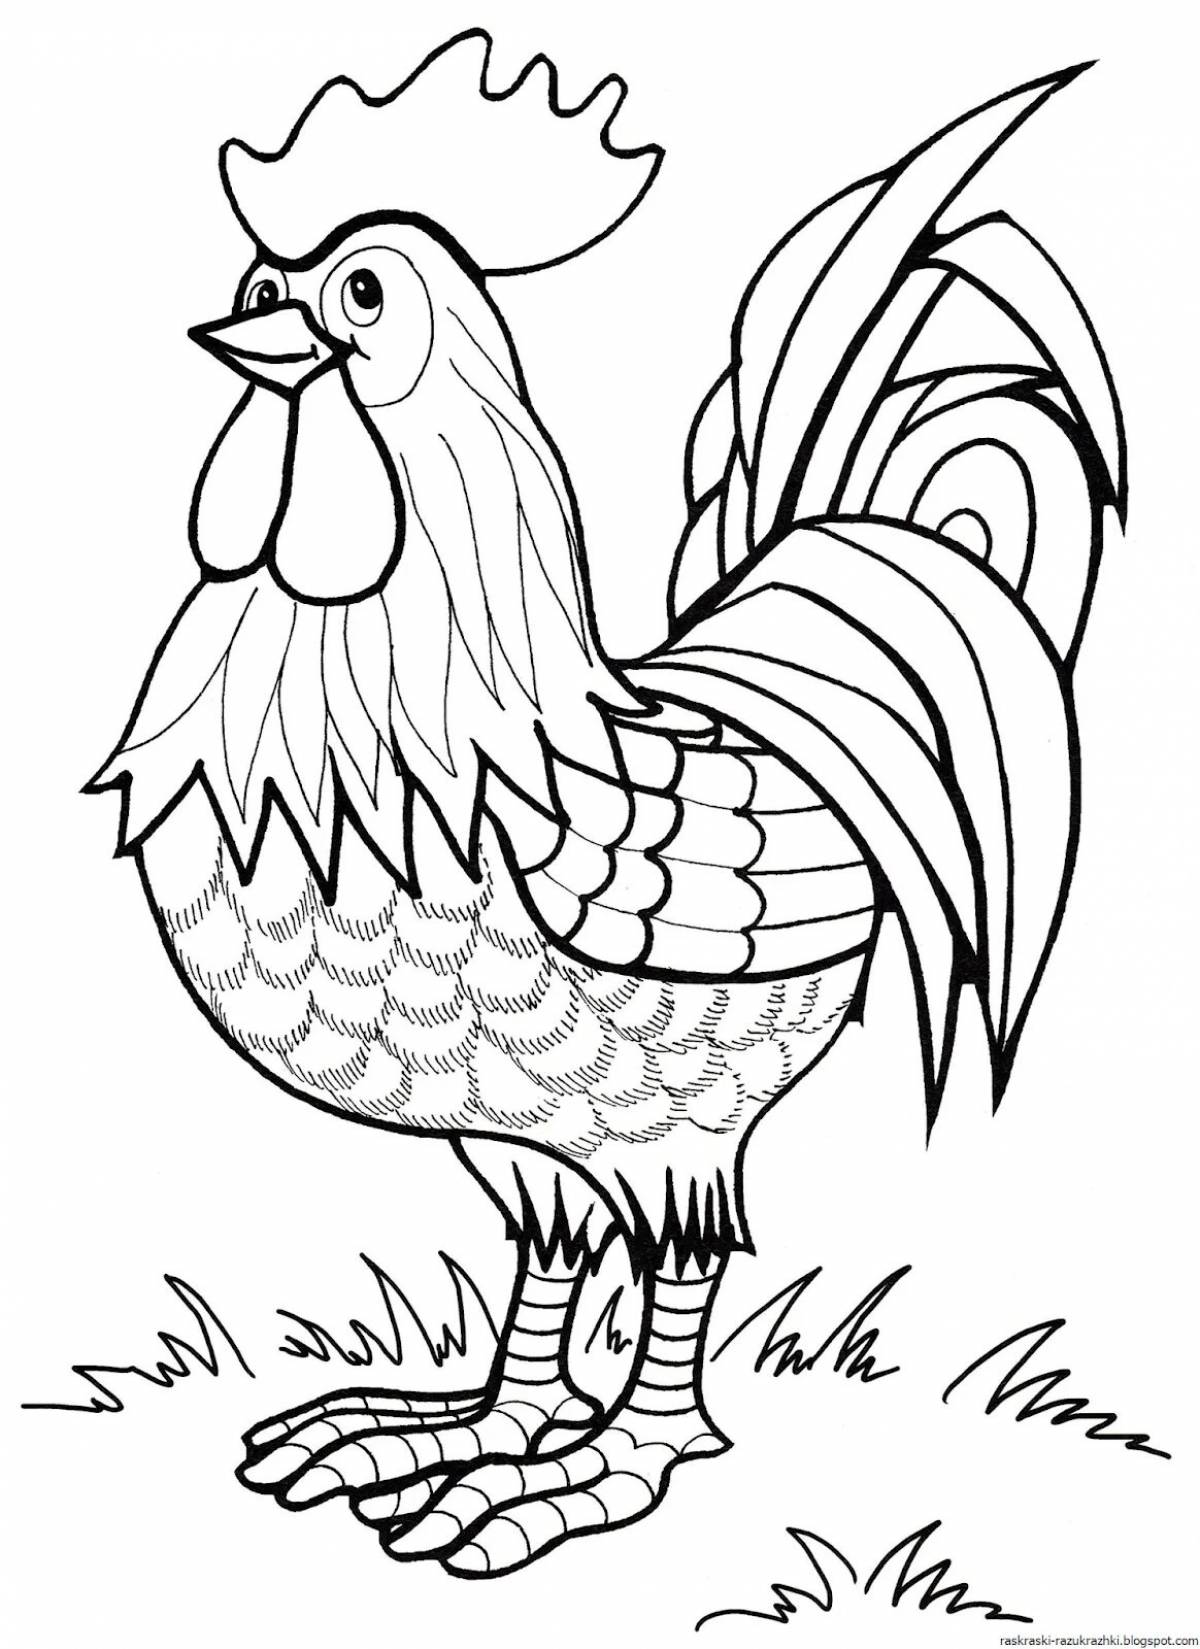 Colorful and funny cockerel drawing for kids